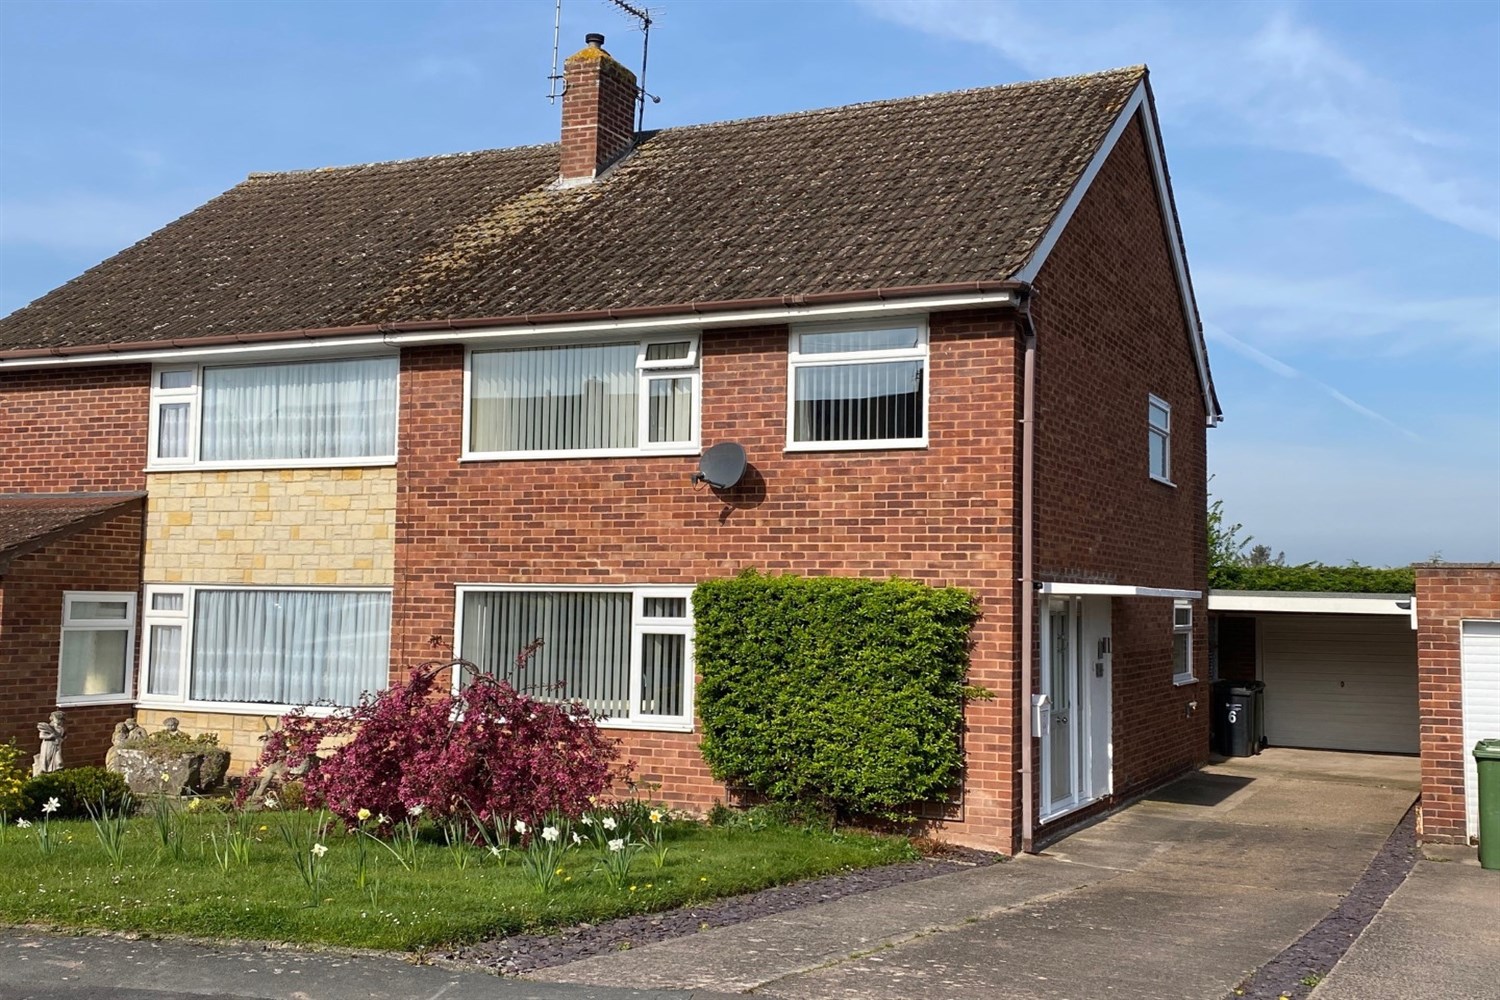 6 Carroll Avenue, Kings Acre, Hereford